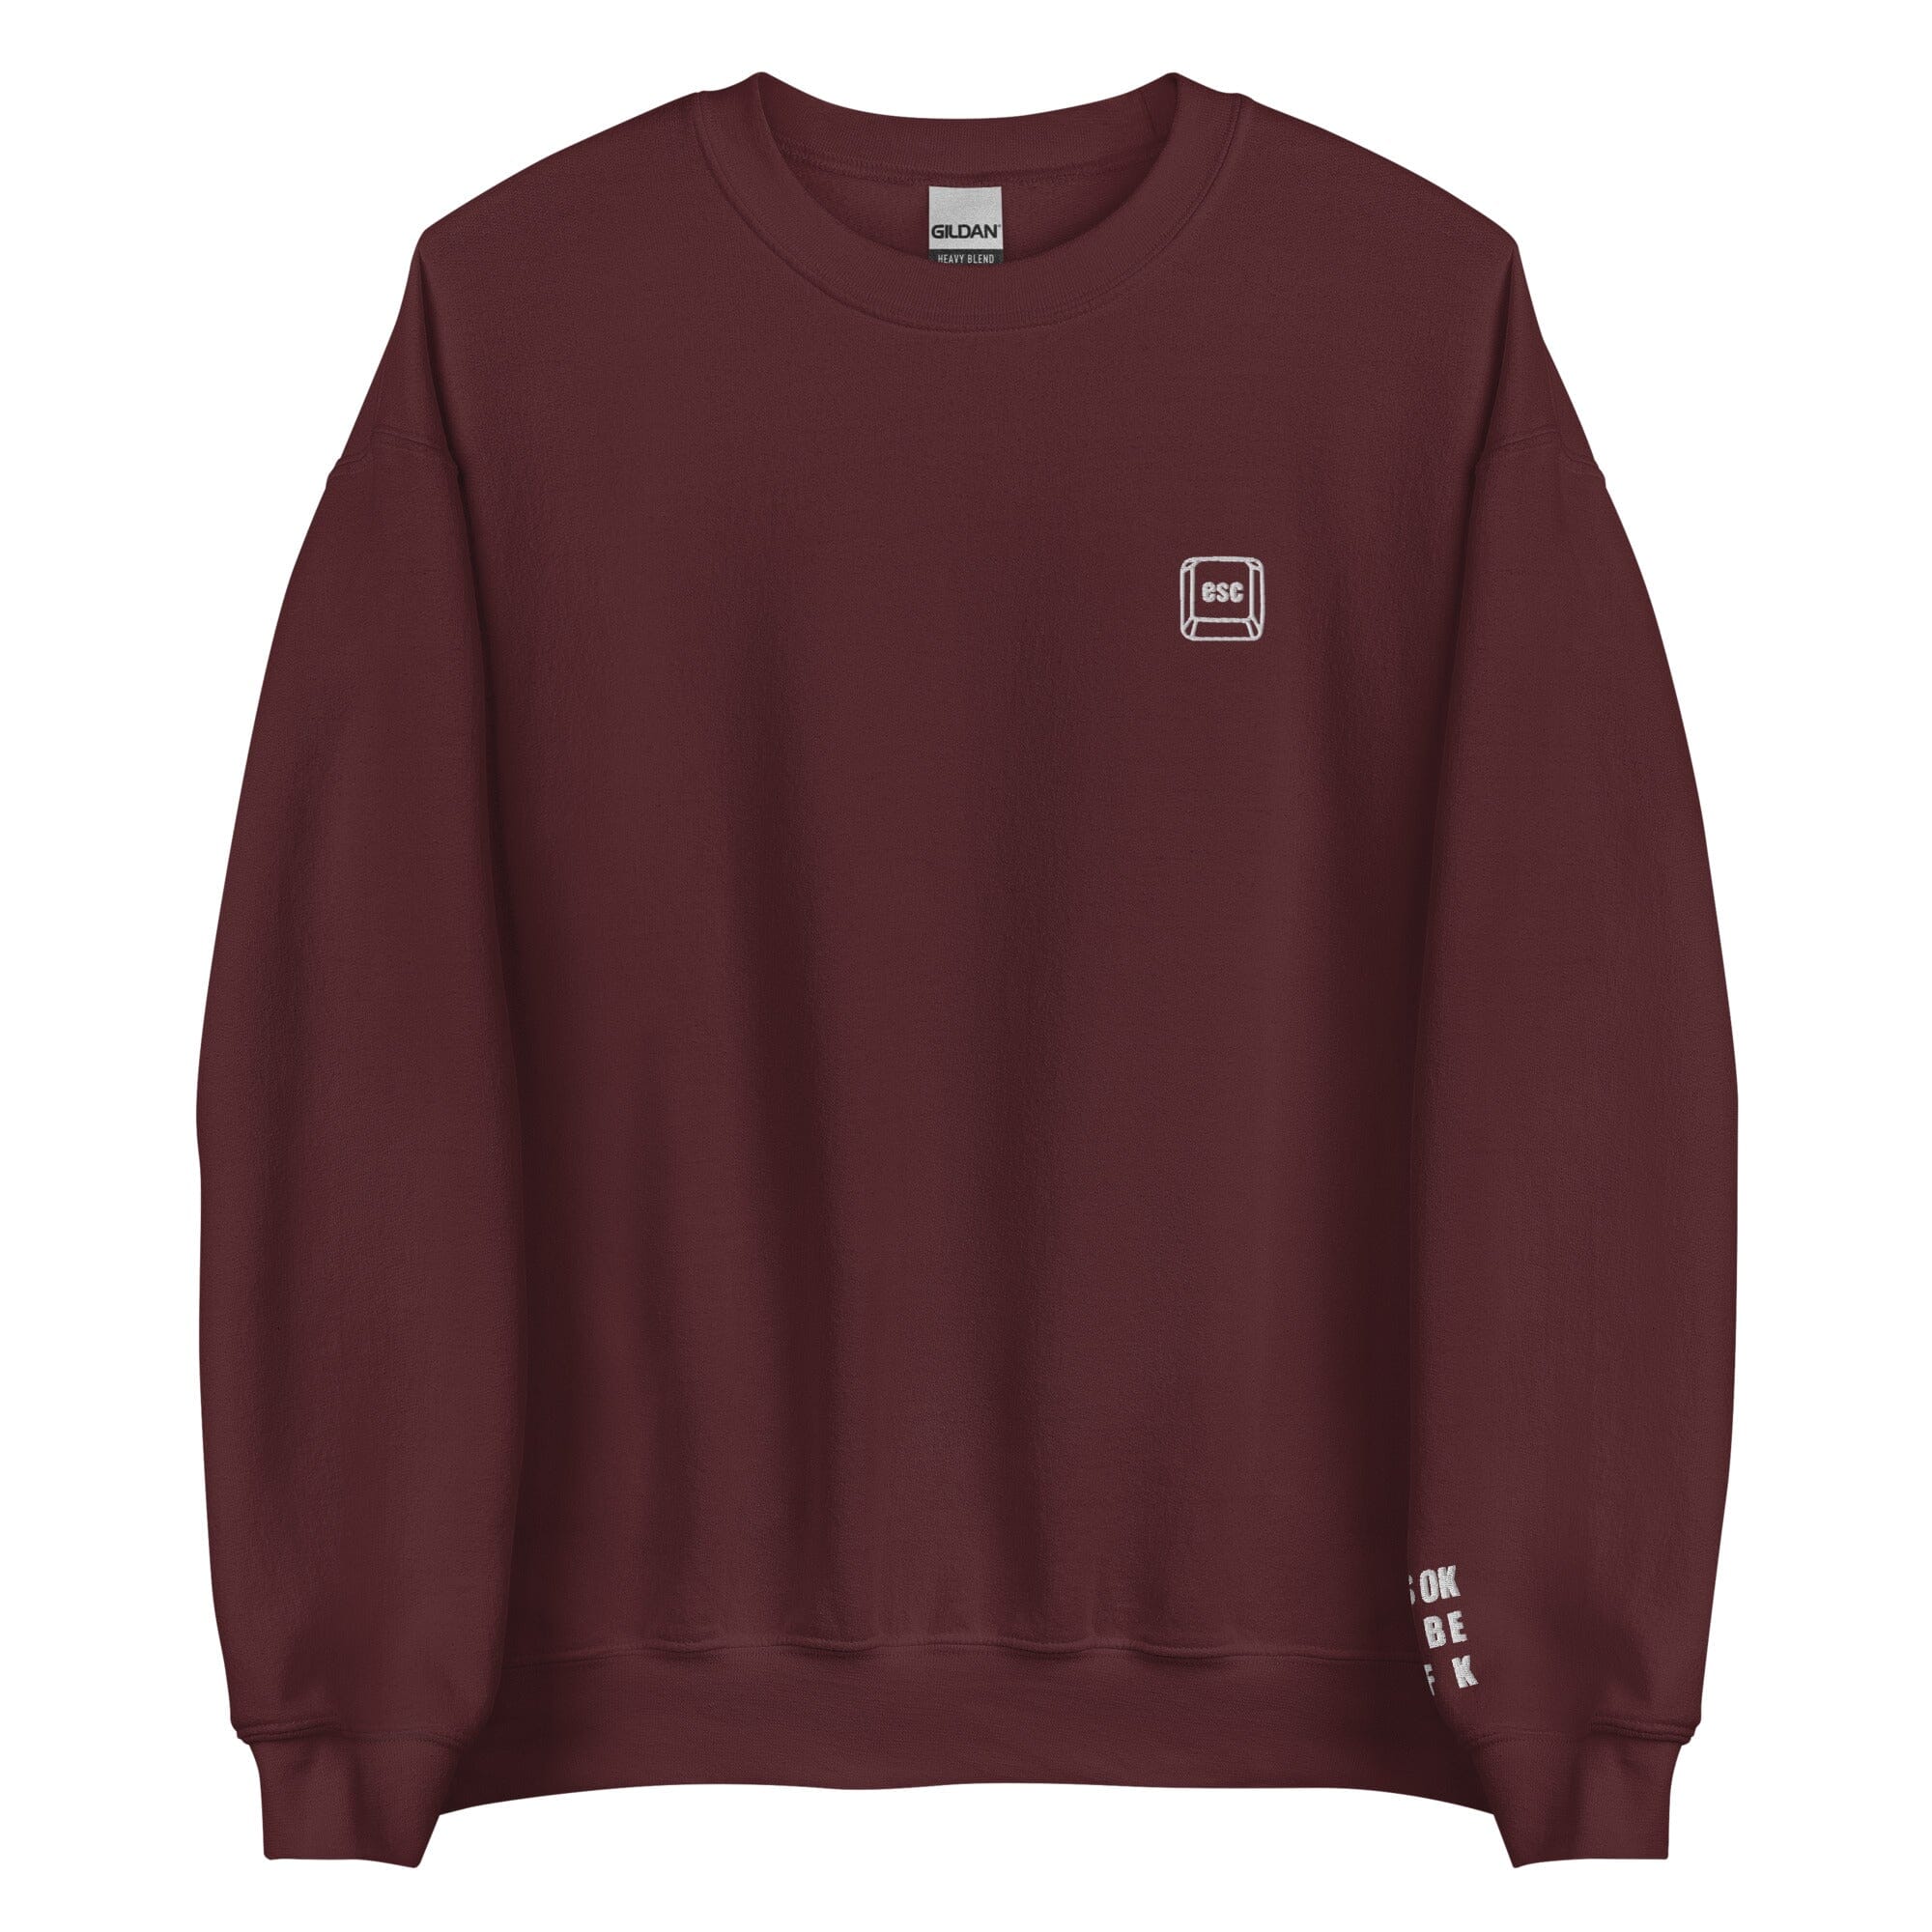 It's Ok to be AFK | Unisex Sweatshirt | Gamer Affirmations Threads & Thistles Inventory Maroon S 